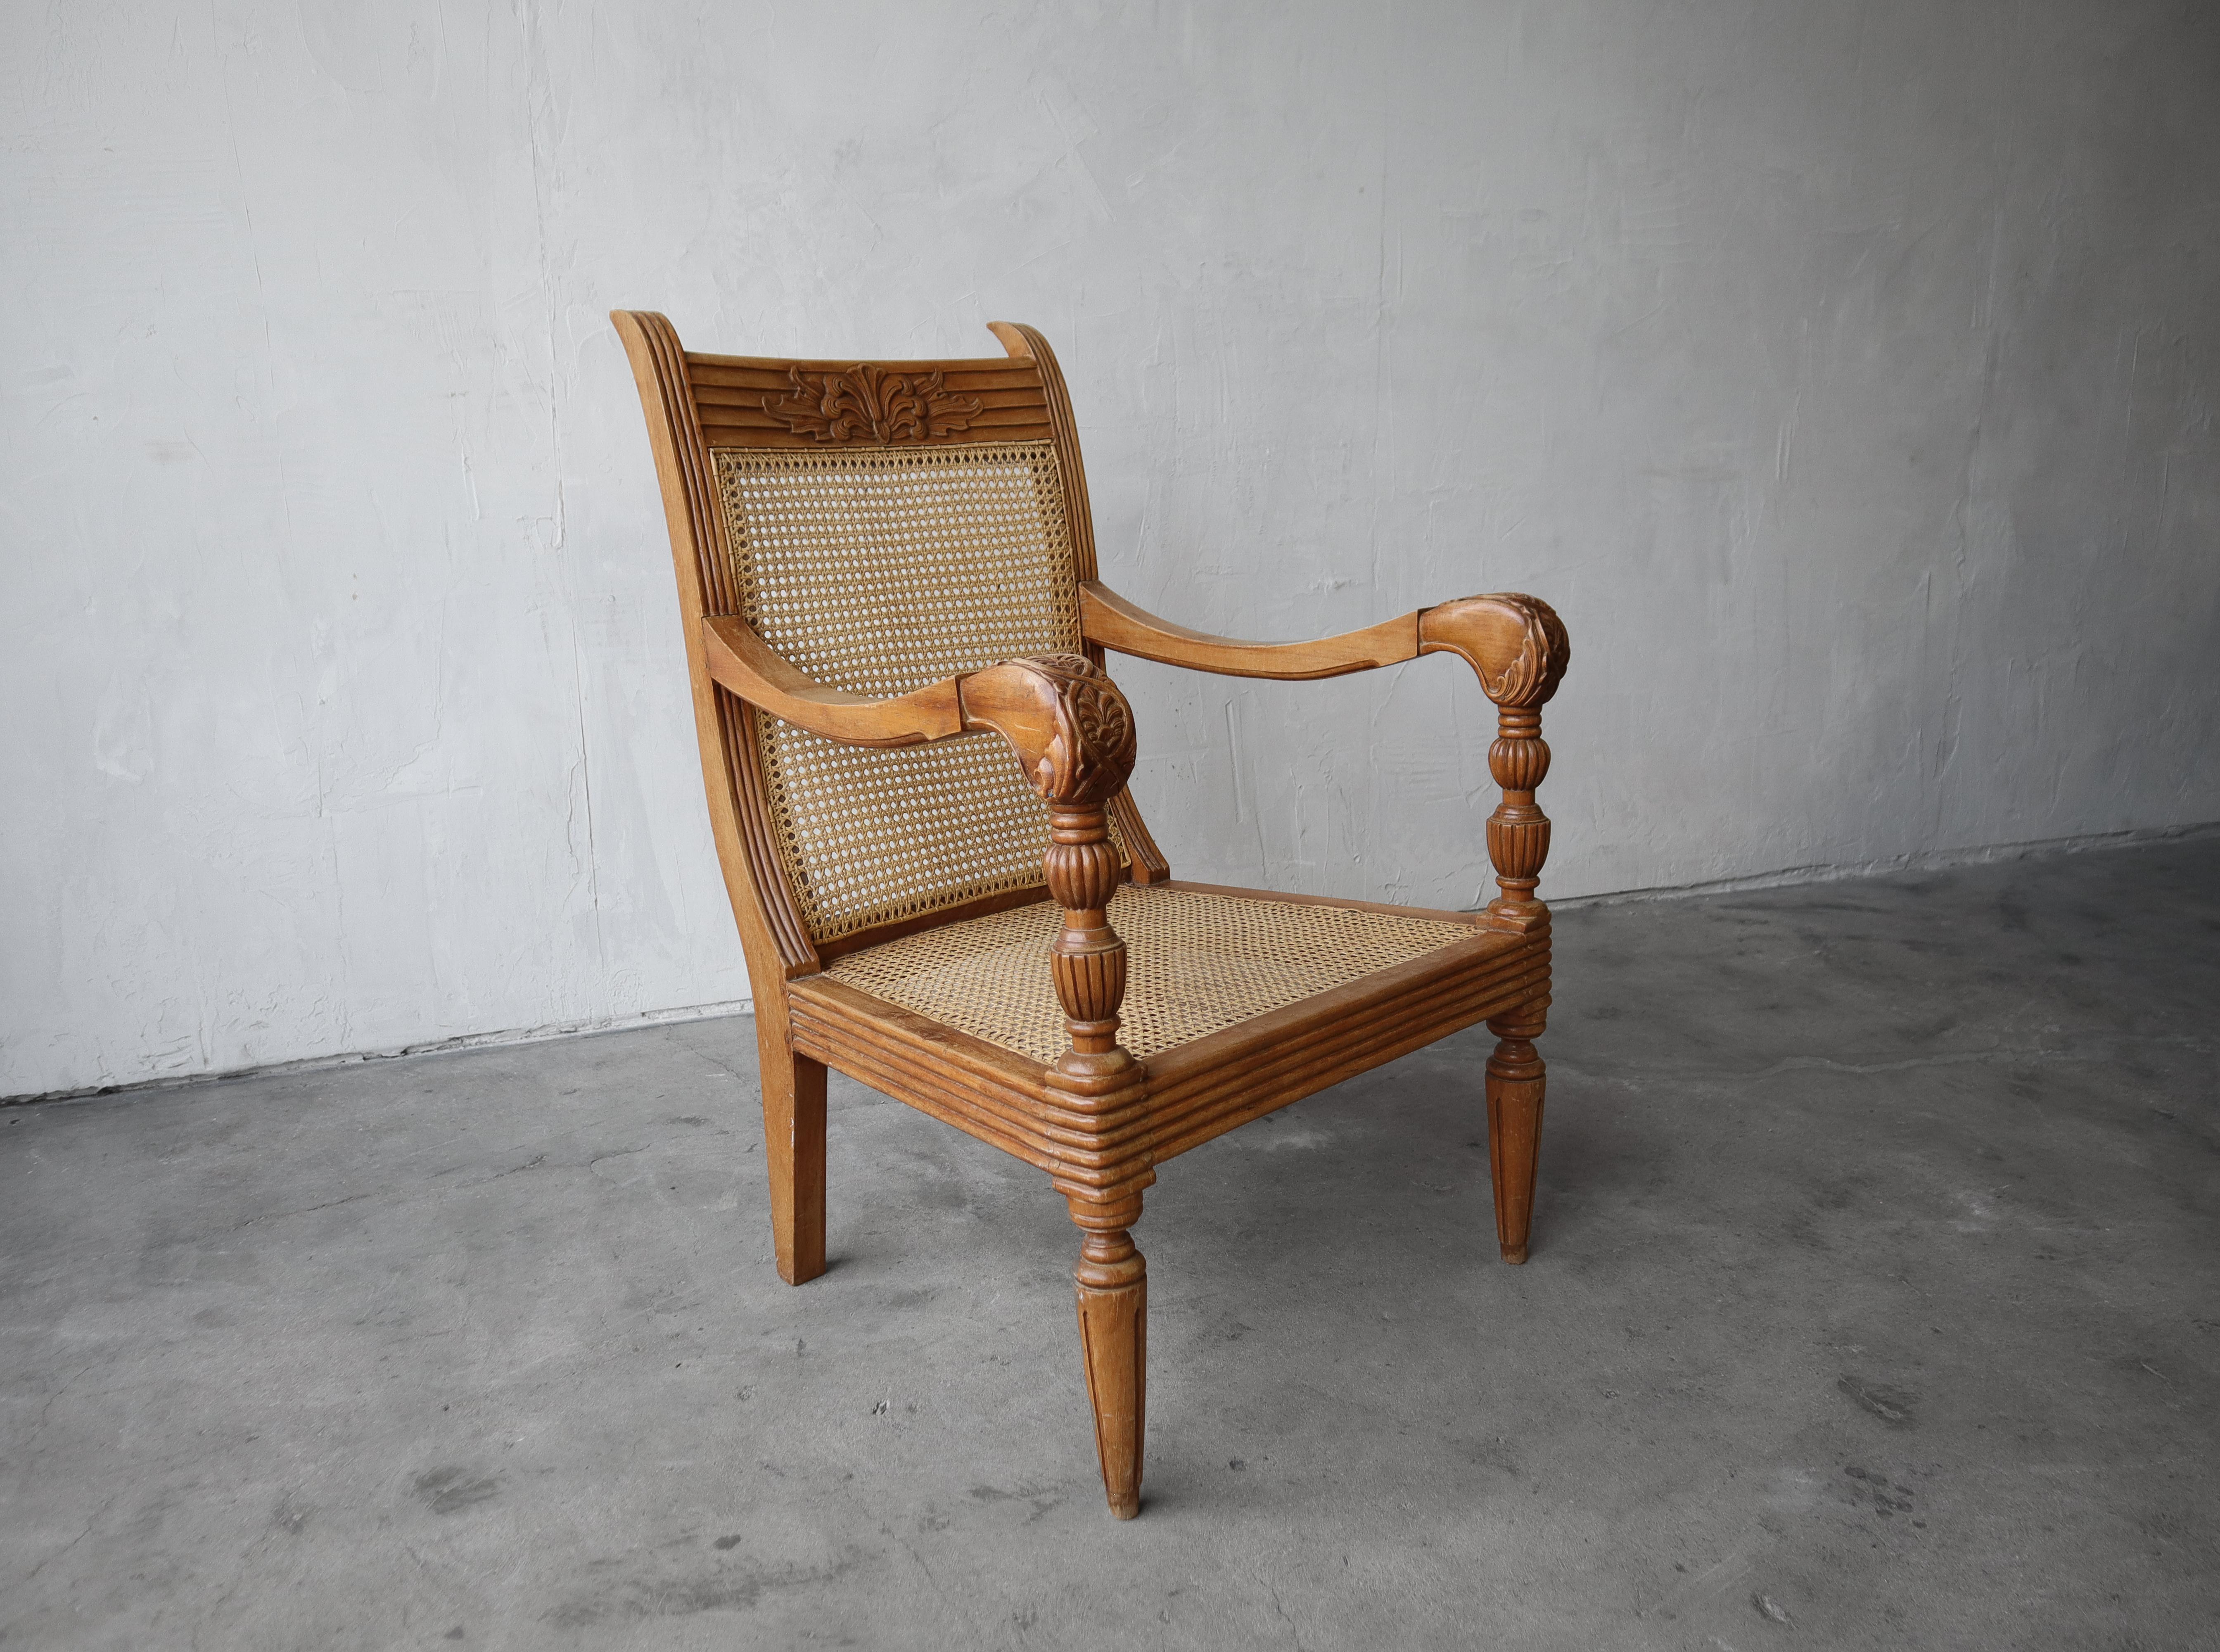 Beautiful antique carved teak and cane lounge chair. The beauty is truly in the details of this chair. The carved and turned wood are stunning. It's in excellent condition for its age. There is some light patina from age and use, mainly on the arms,